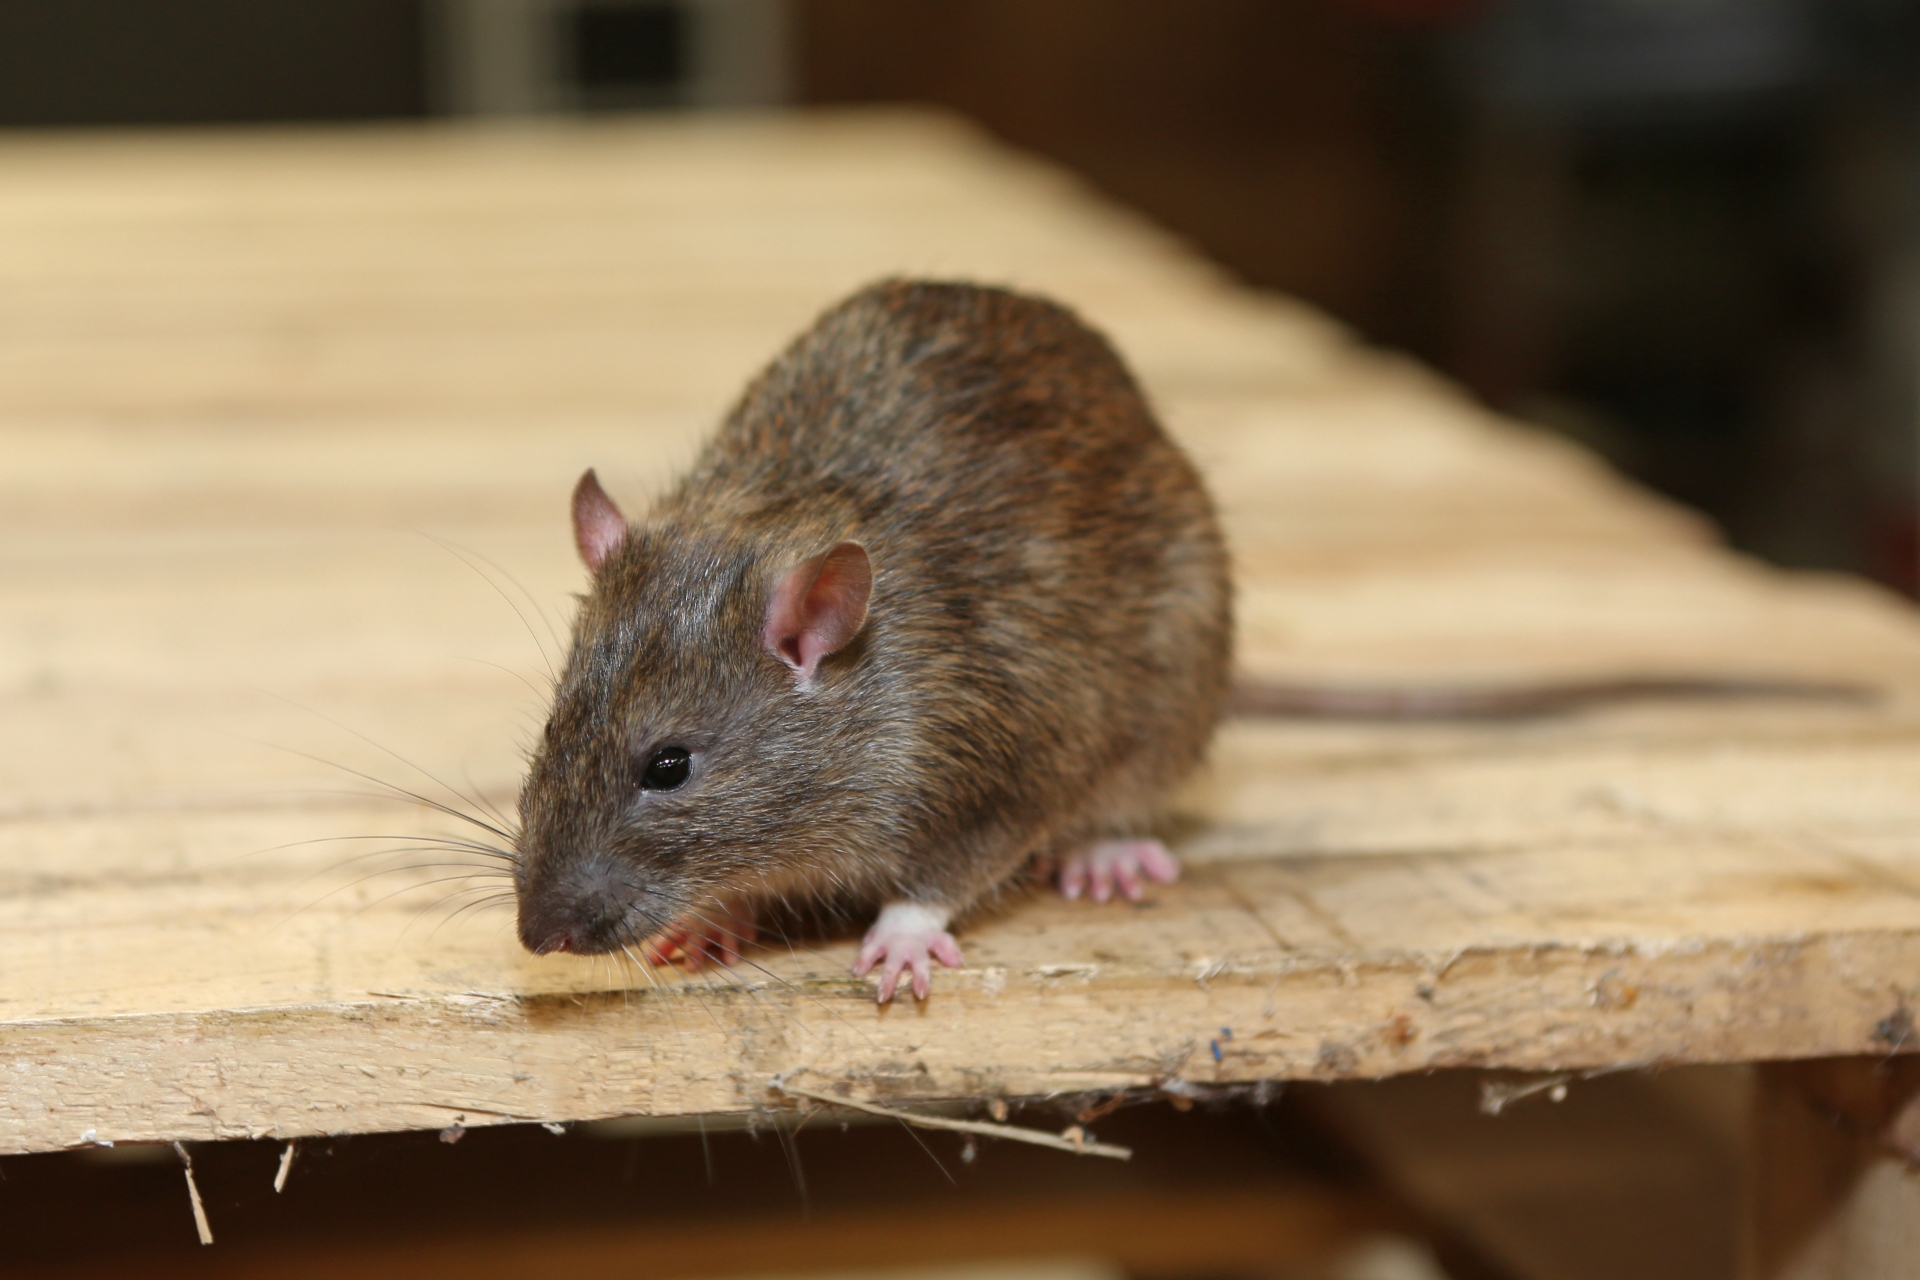 Rat extermination, Pest Control in Plumstead, SE18. Call Now 020 8166 9746